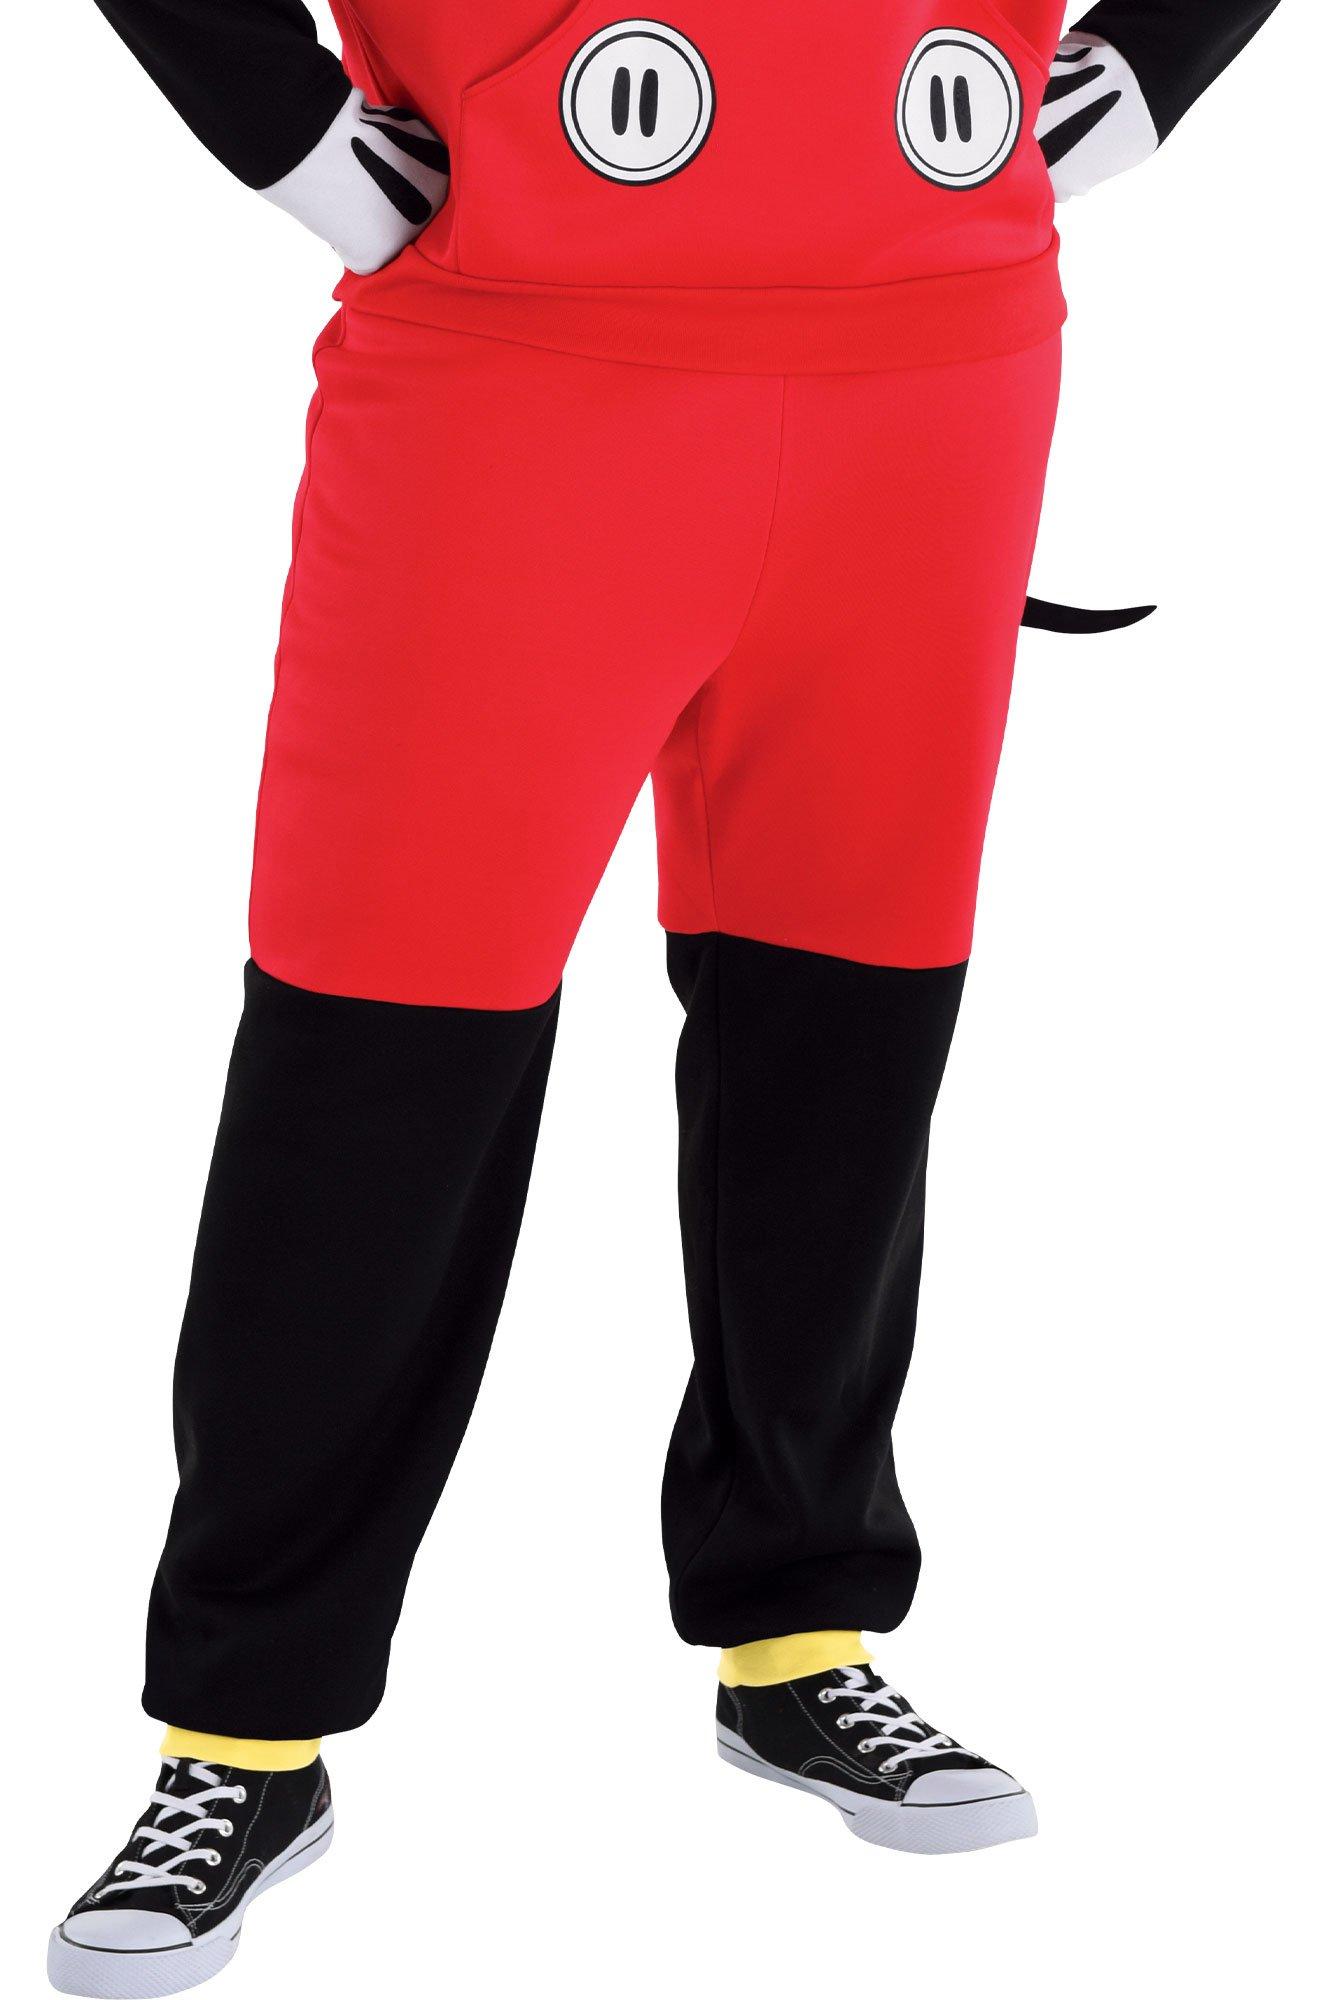 Adult Deluxe Mickey Mouse Costume, Adult Unisex, Size: XL, Red